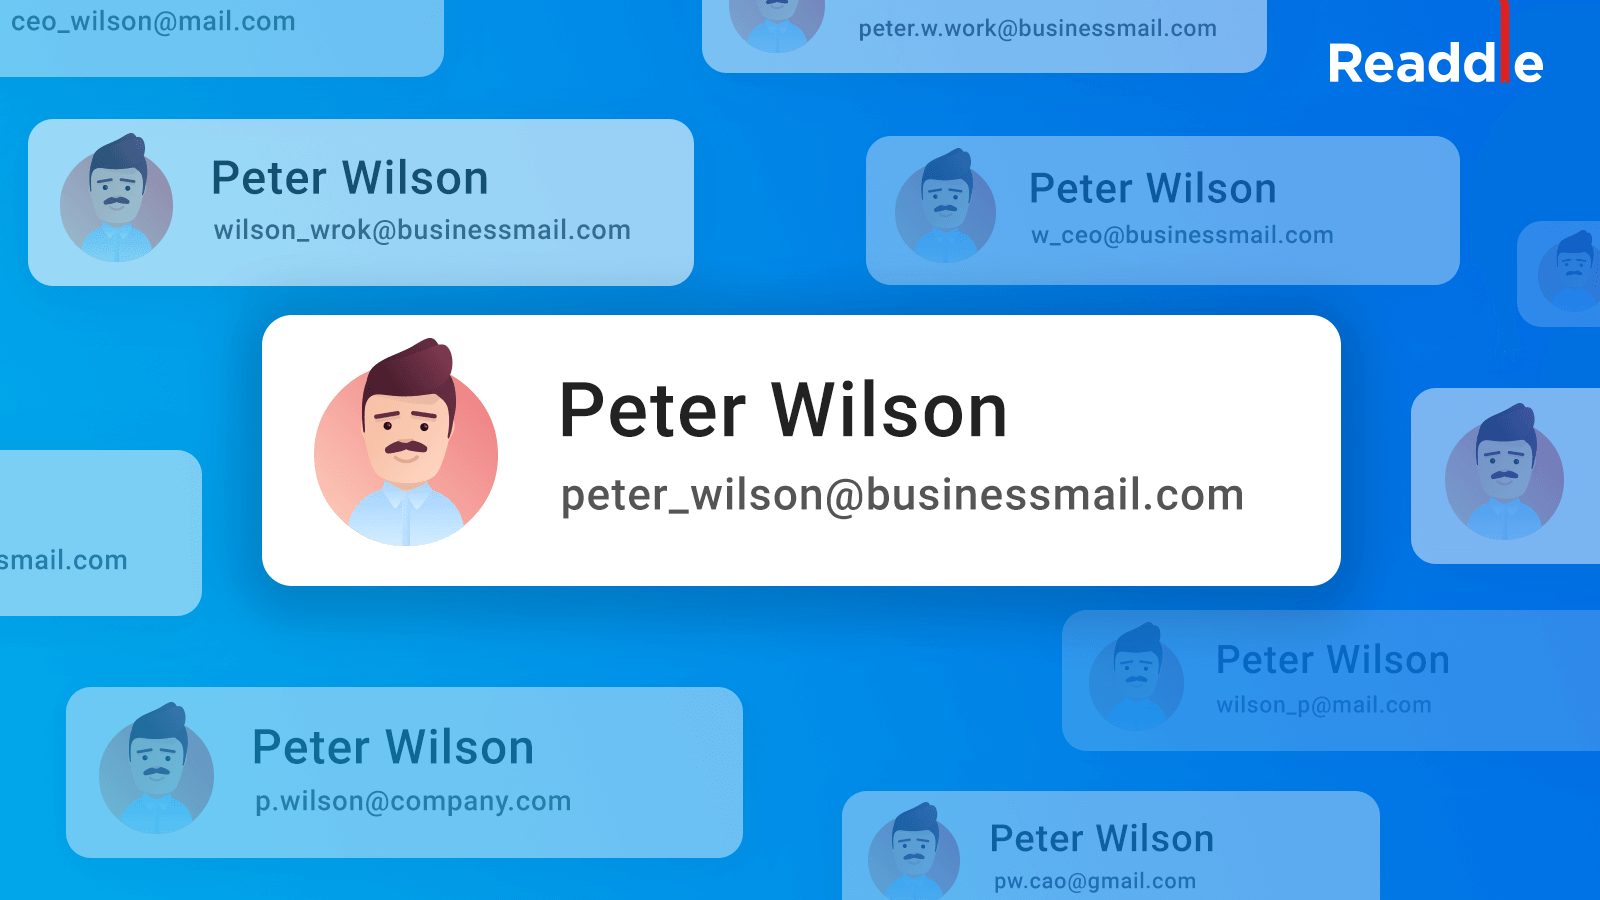 What is the best official email address?